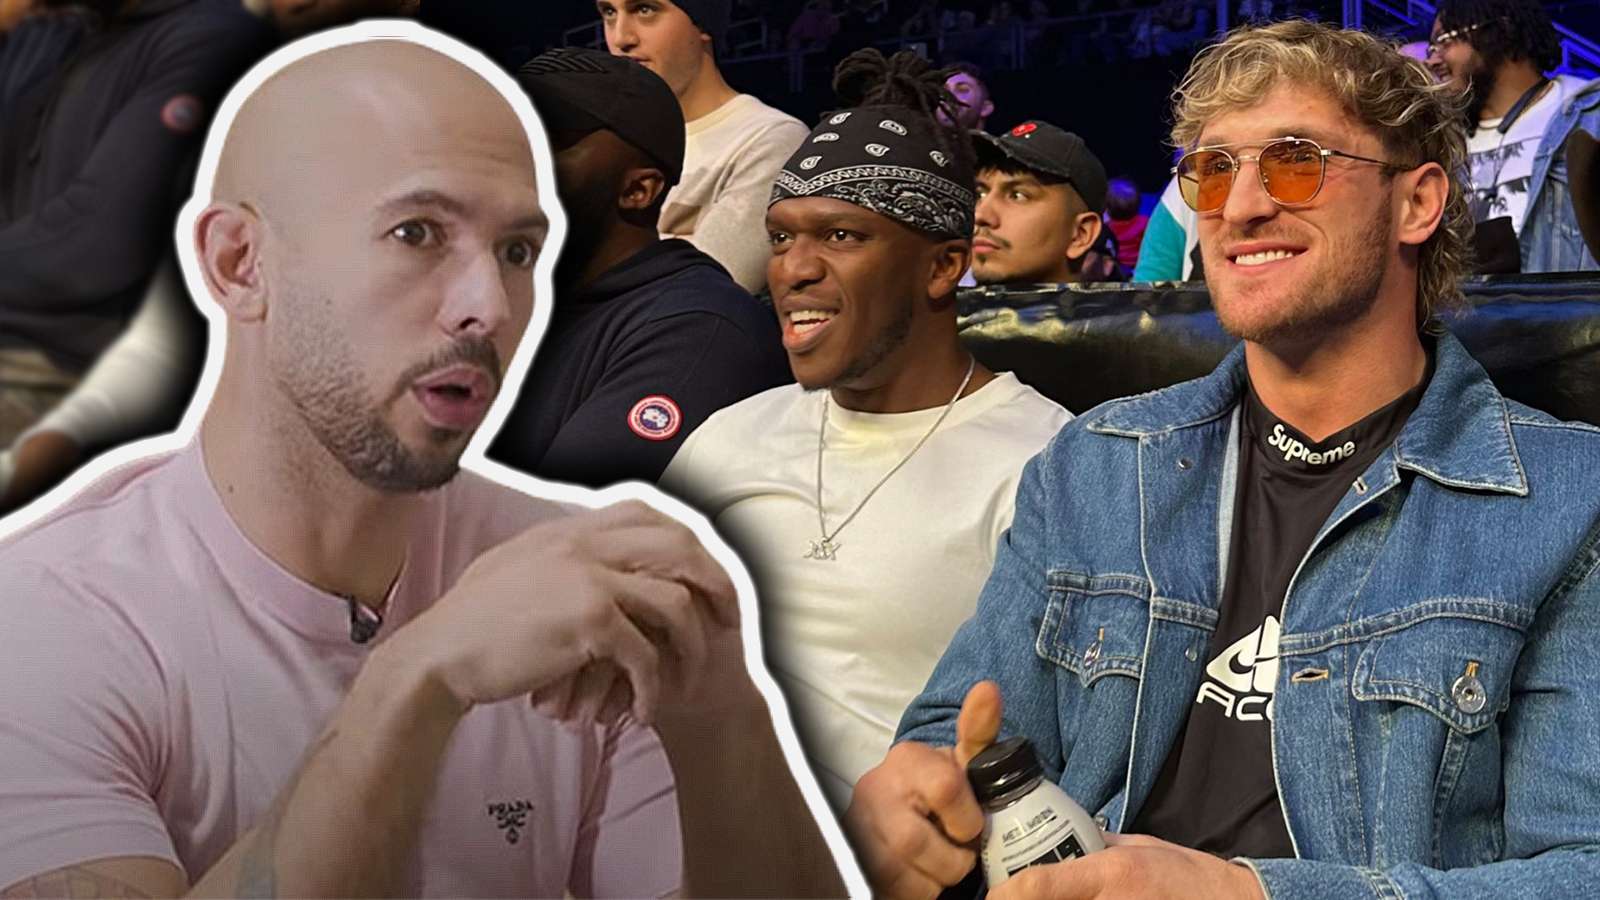 Andrew Tate slams Logan Paul for supporting KSI boxing event